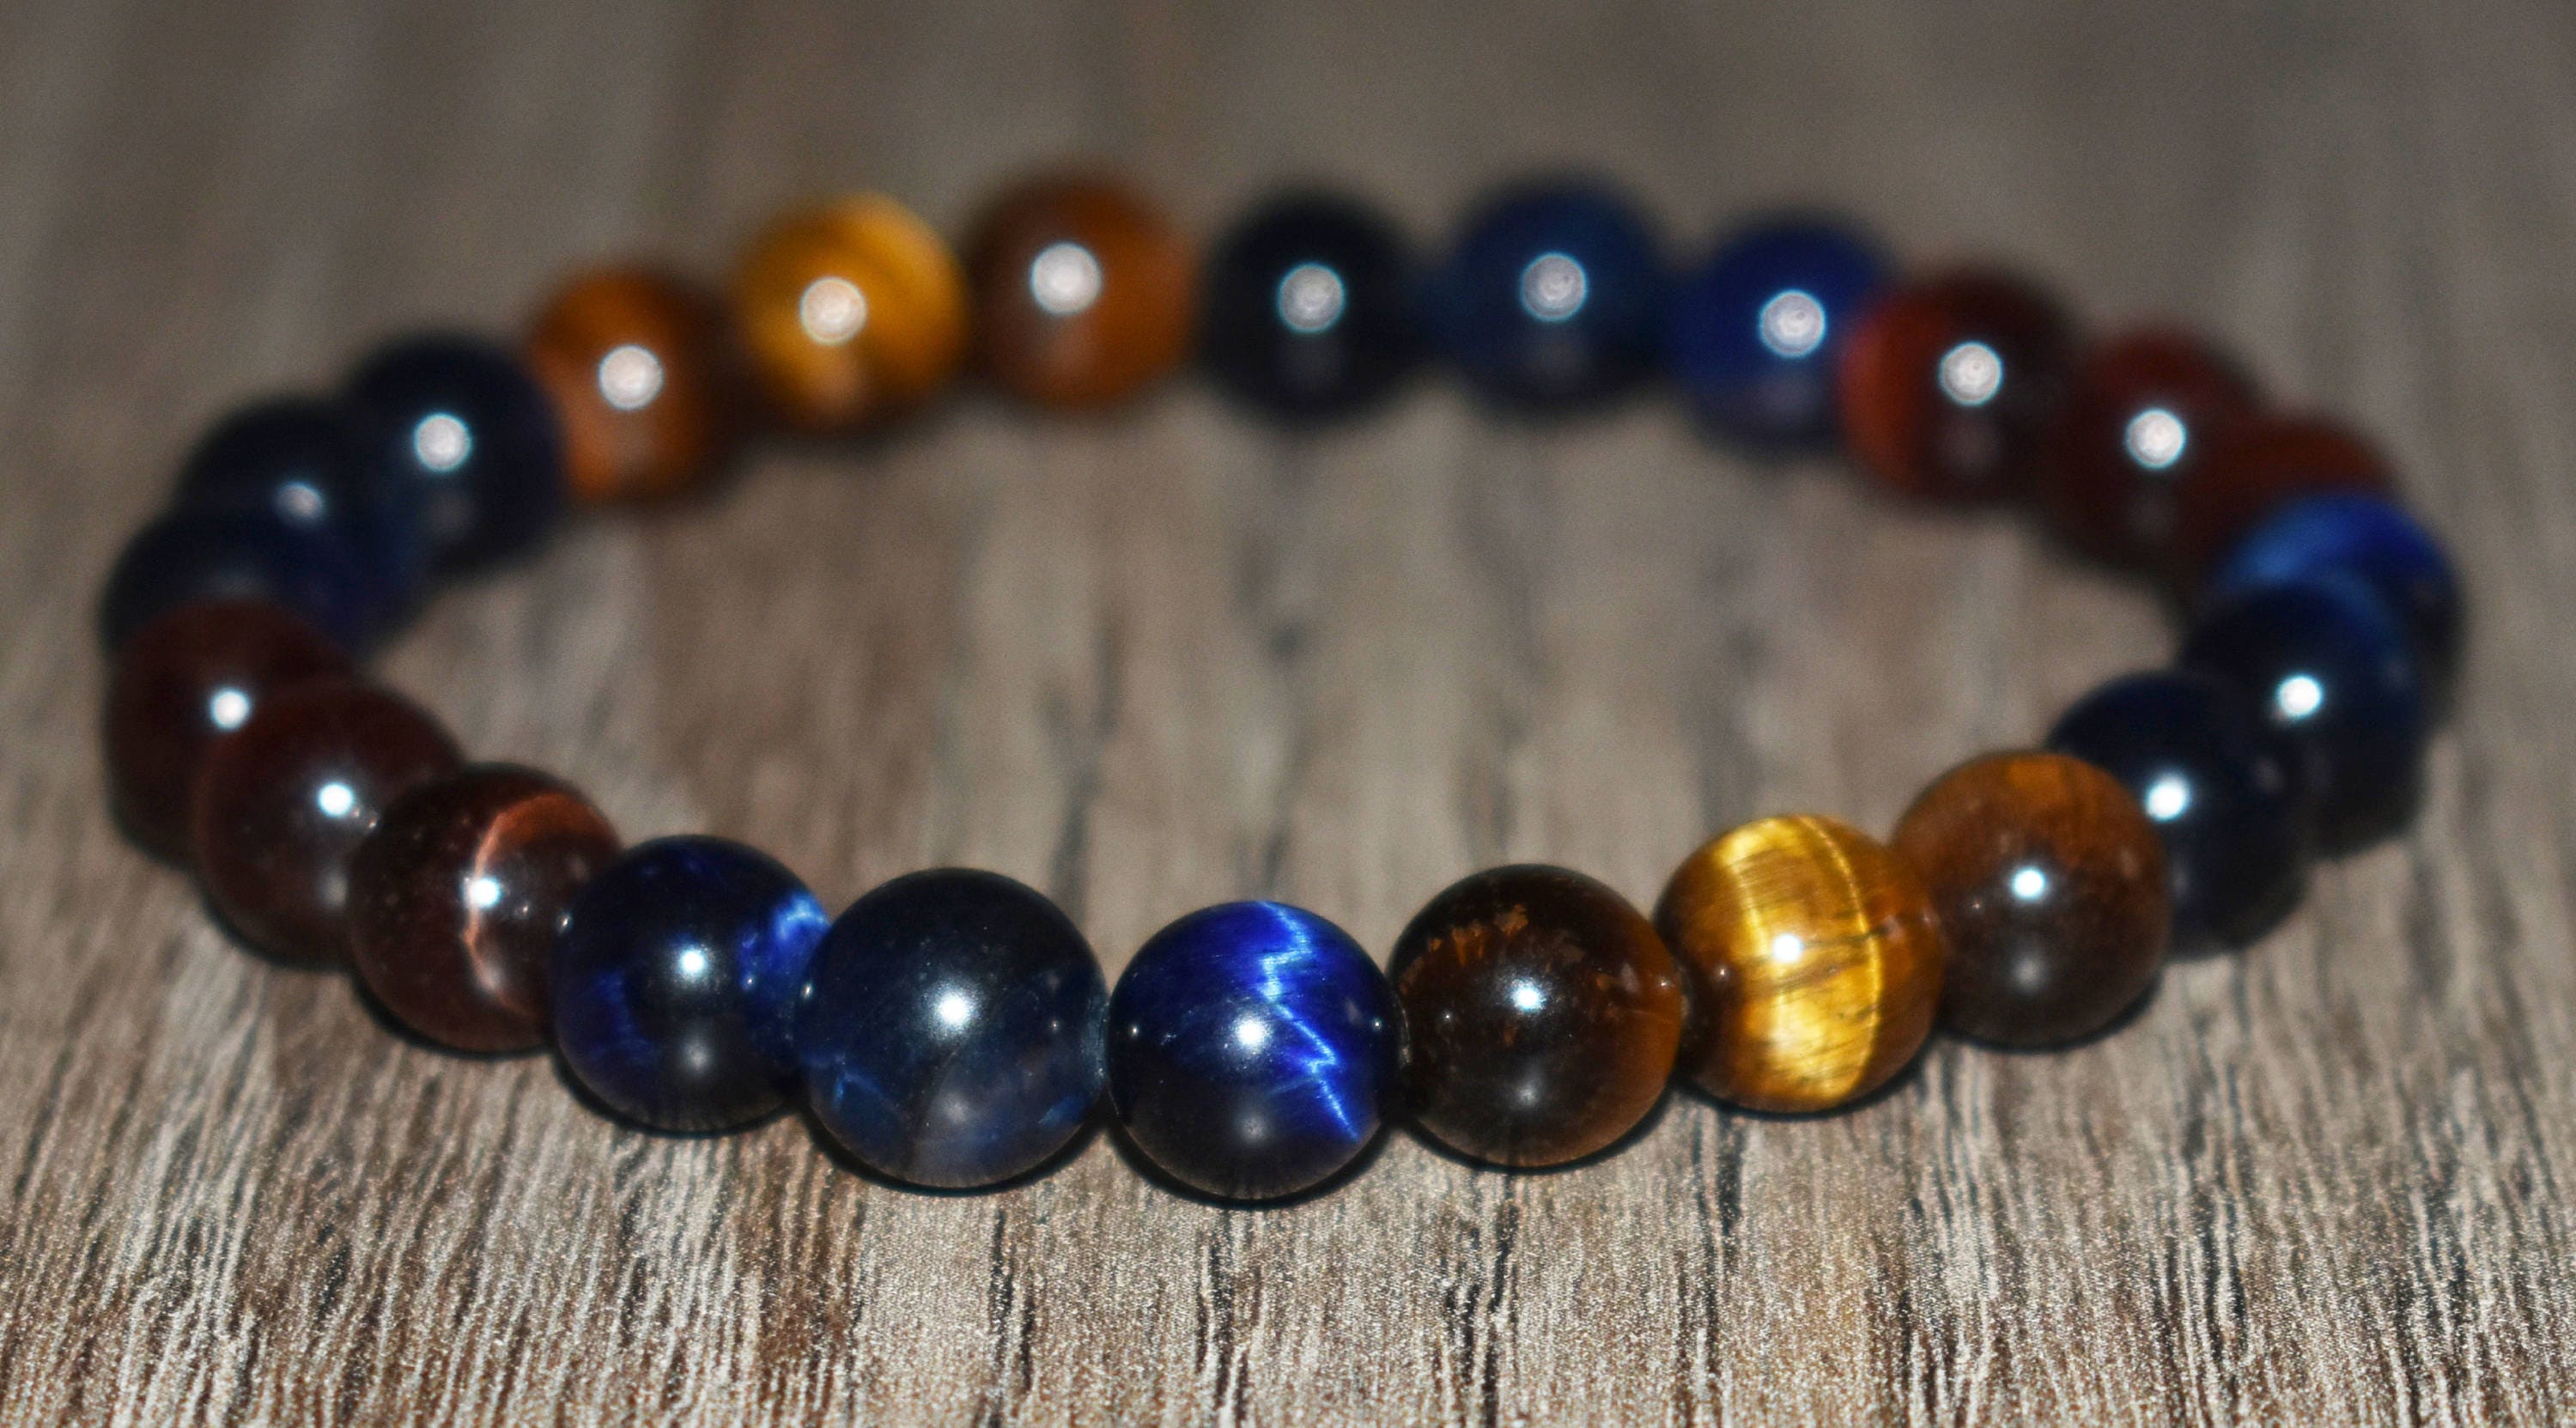 Natural Lava Beads Bracelet 4 Color Tiger Eye Stone with Matte Agate Hand  String (Red Tiger Eye, 8mm Beads x 8.5 inches)